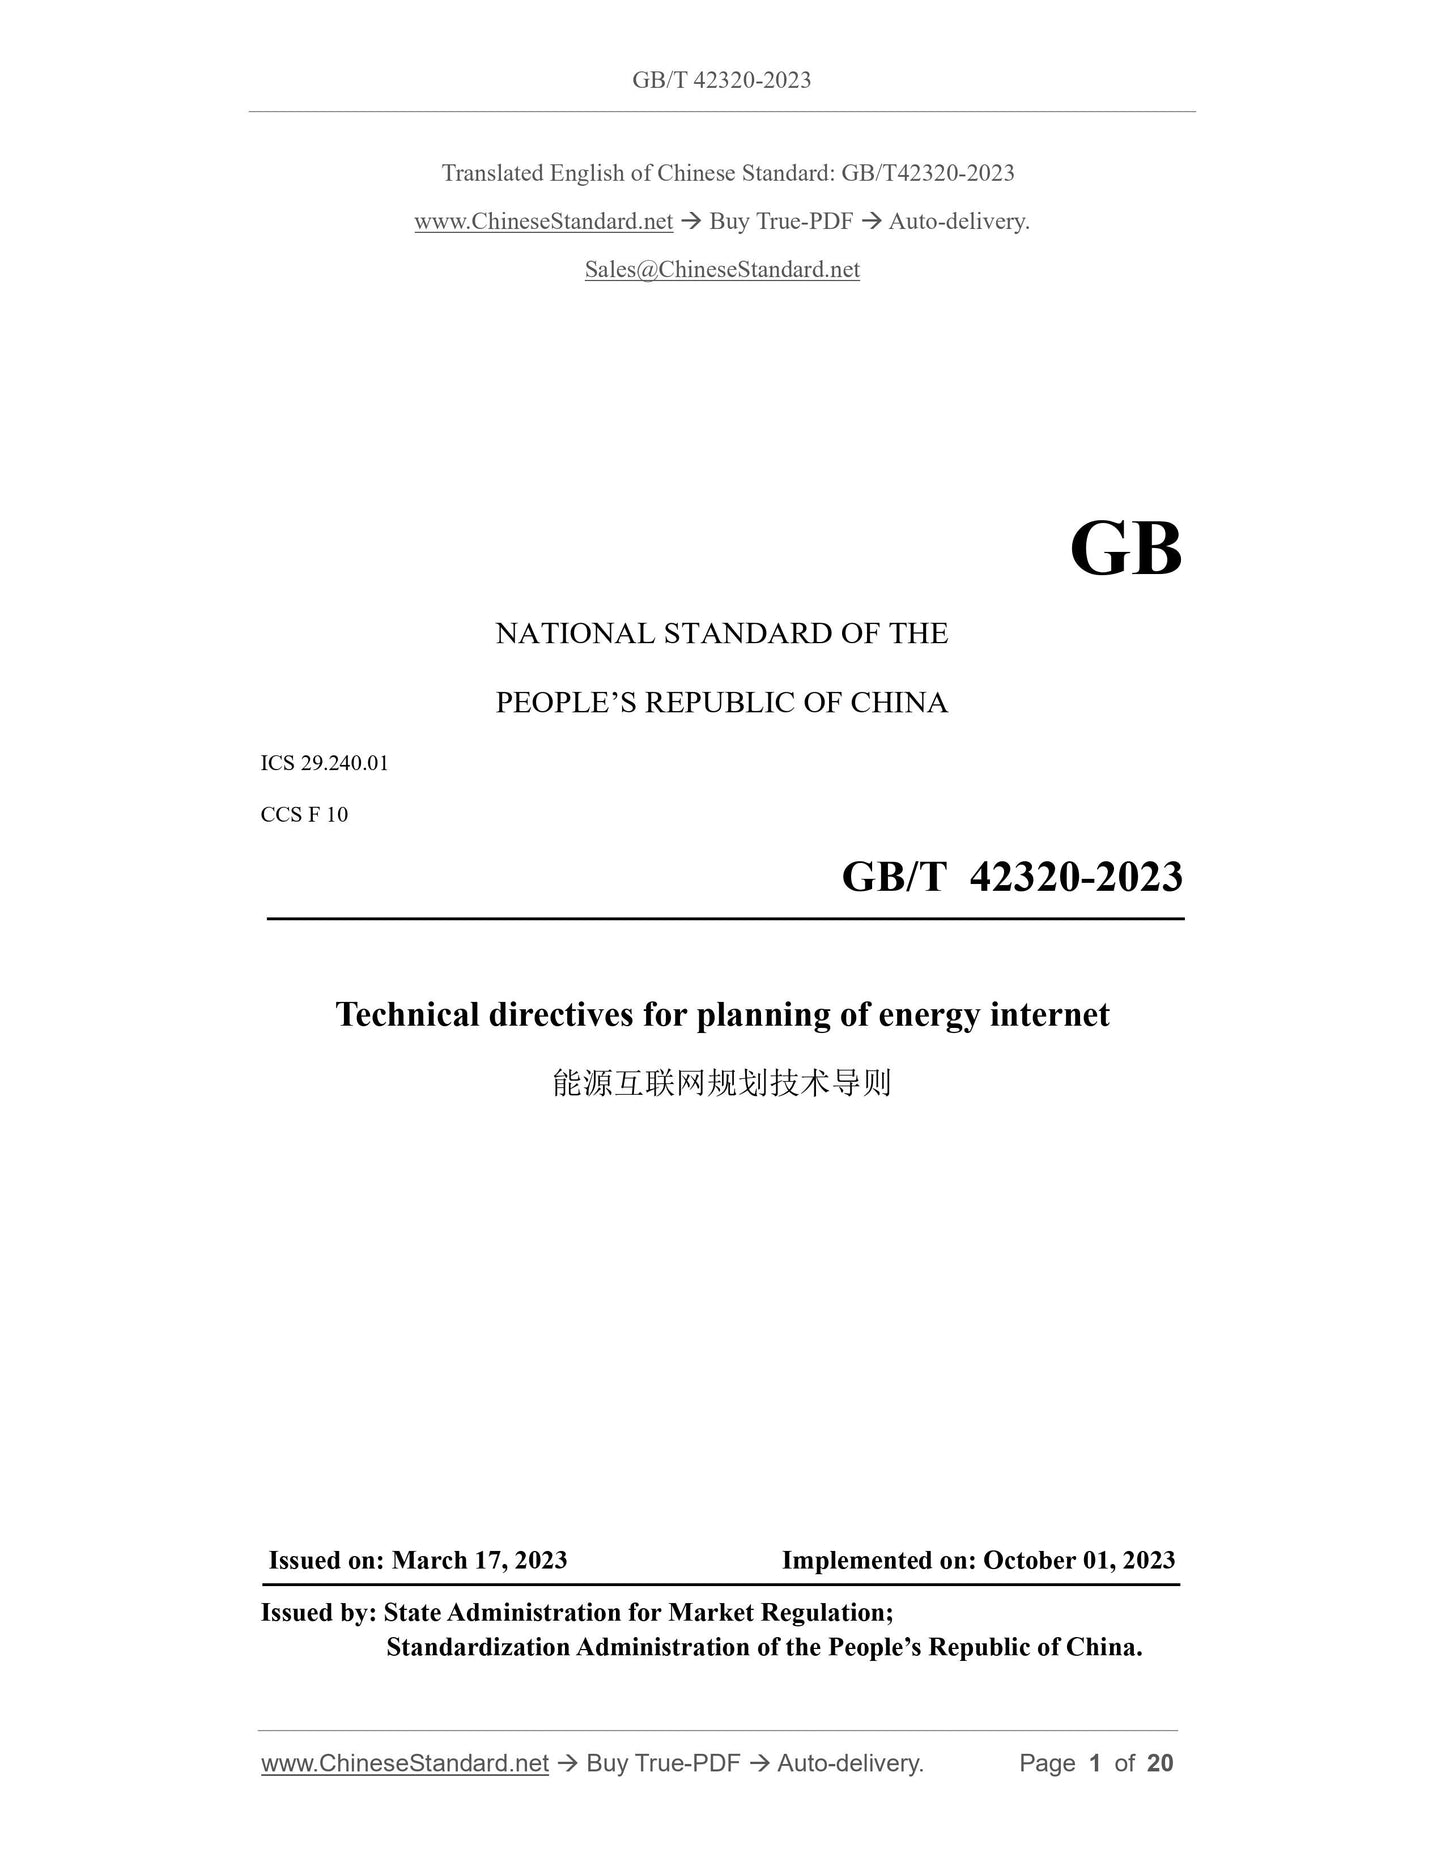 GB/T 42320-2023 Page 1